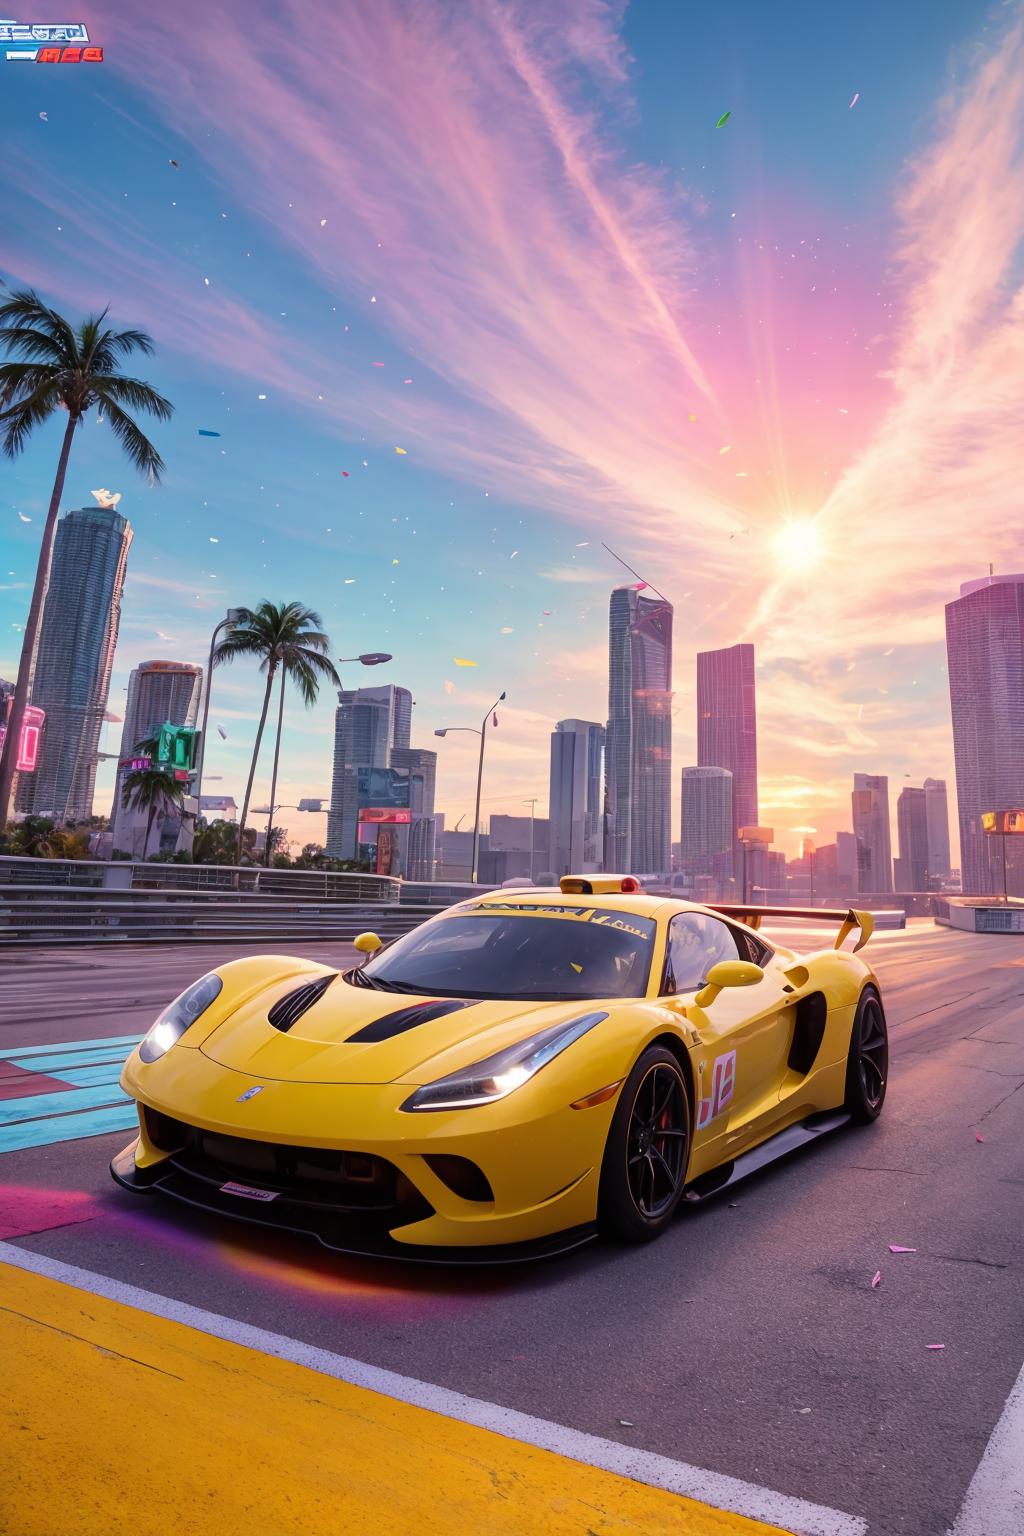 A yellow sports car on a city street at sunset.